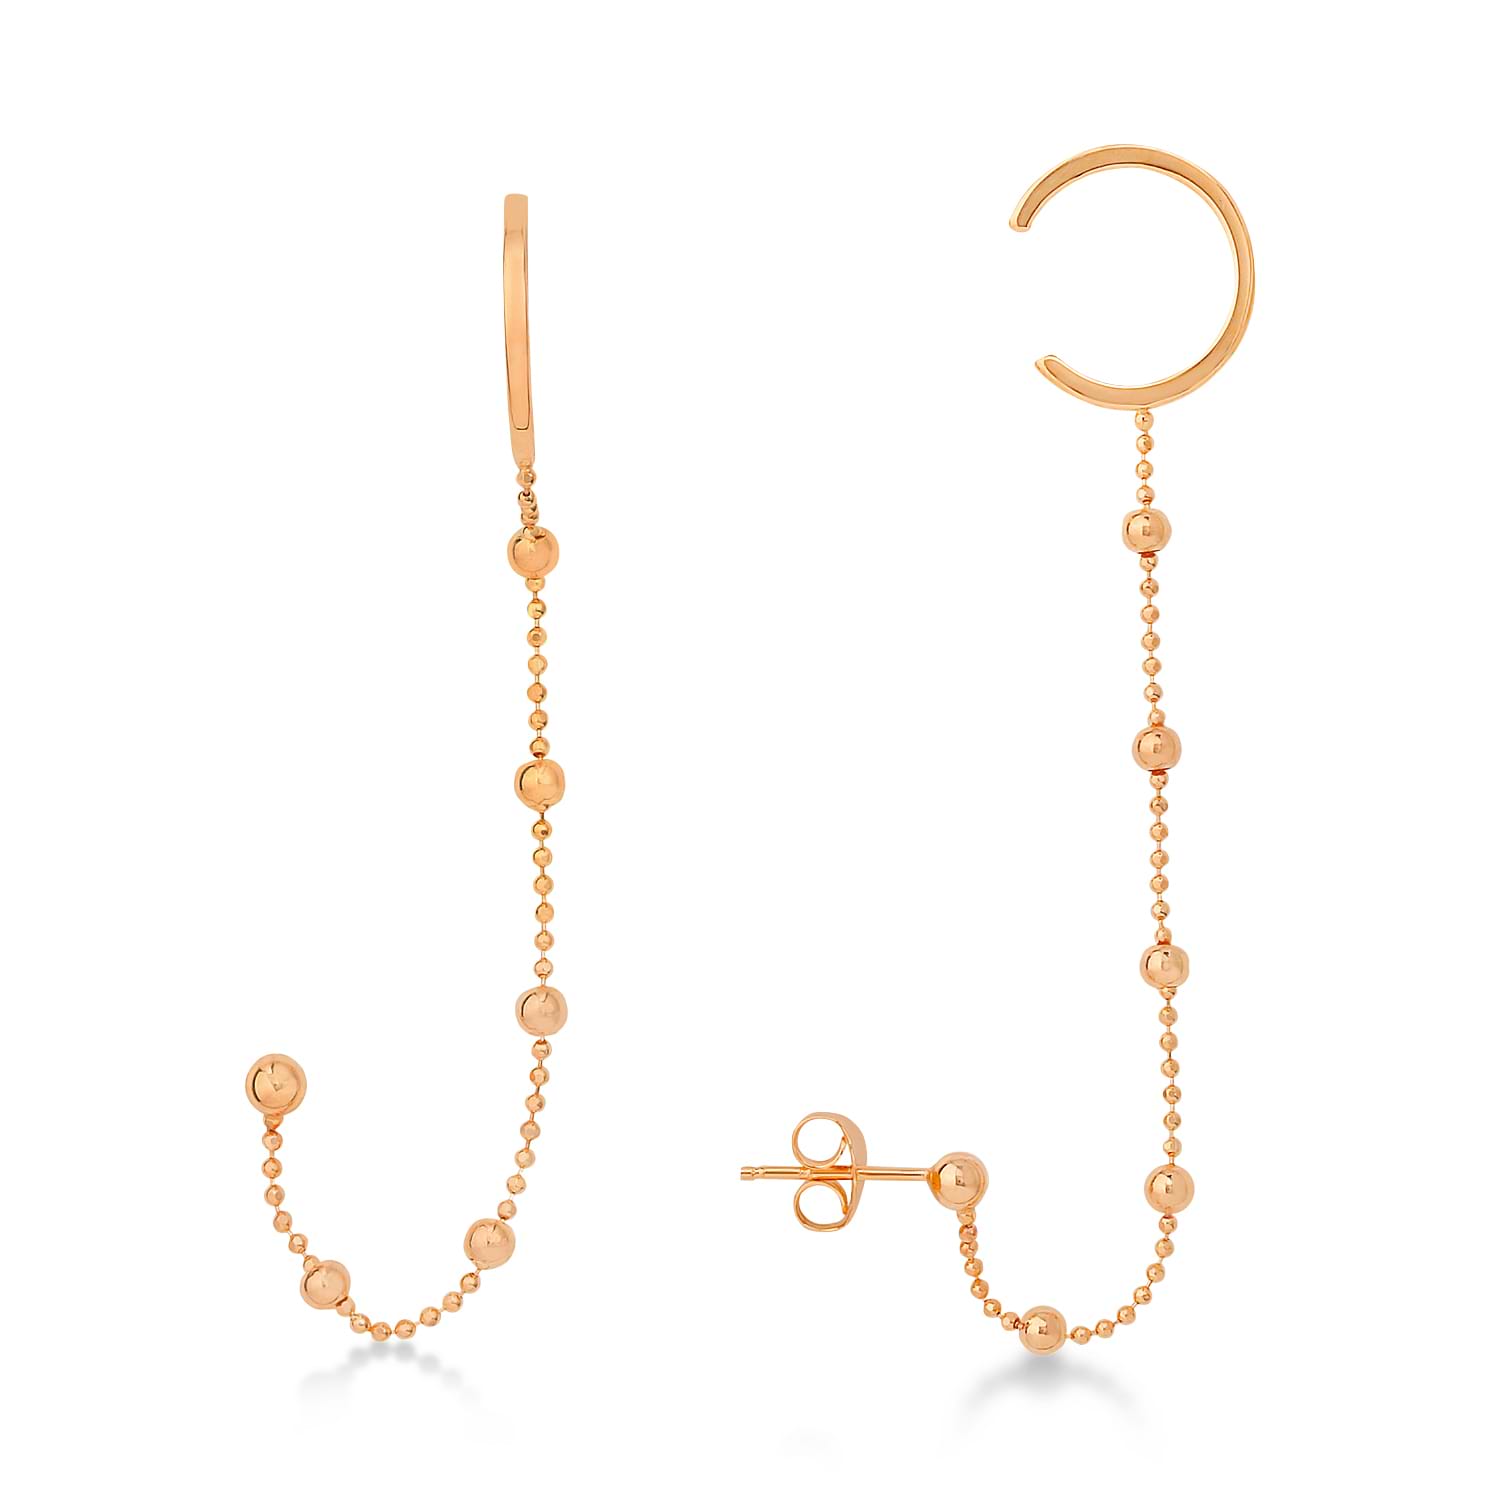 Beaded Dangling Earrings With Cuff 14k Rose Gold